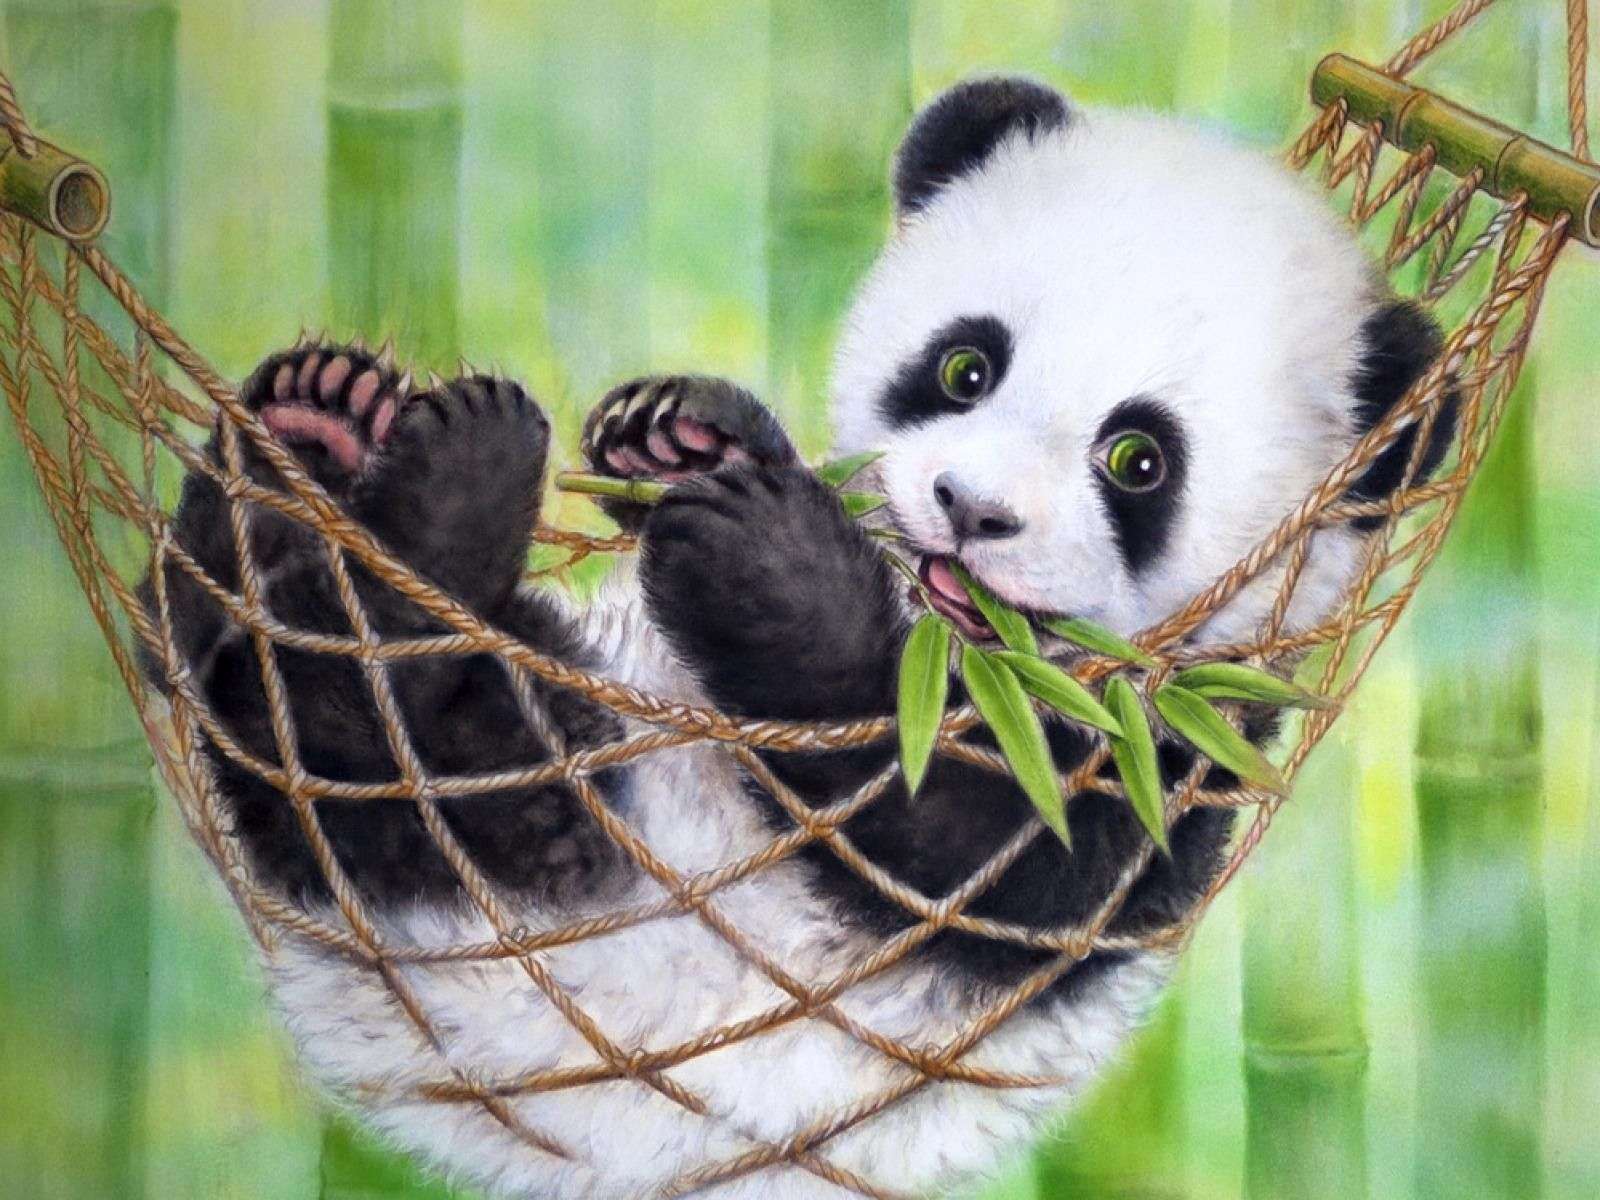 Sweet panda puzzle online from photo